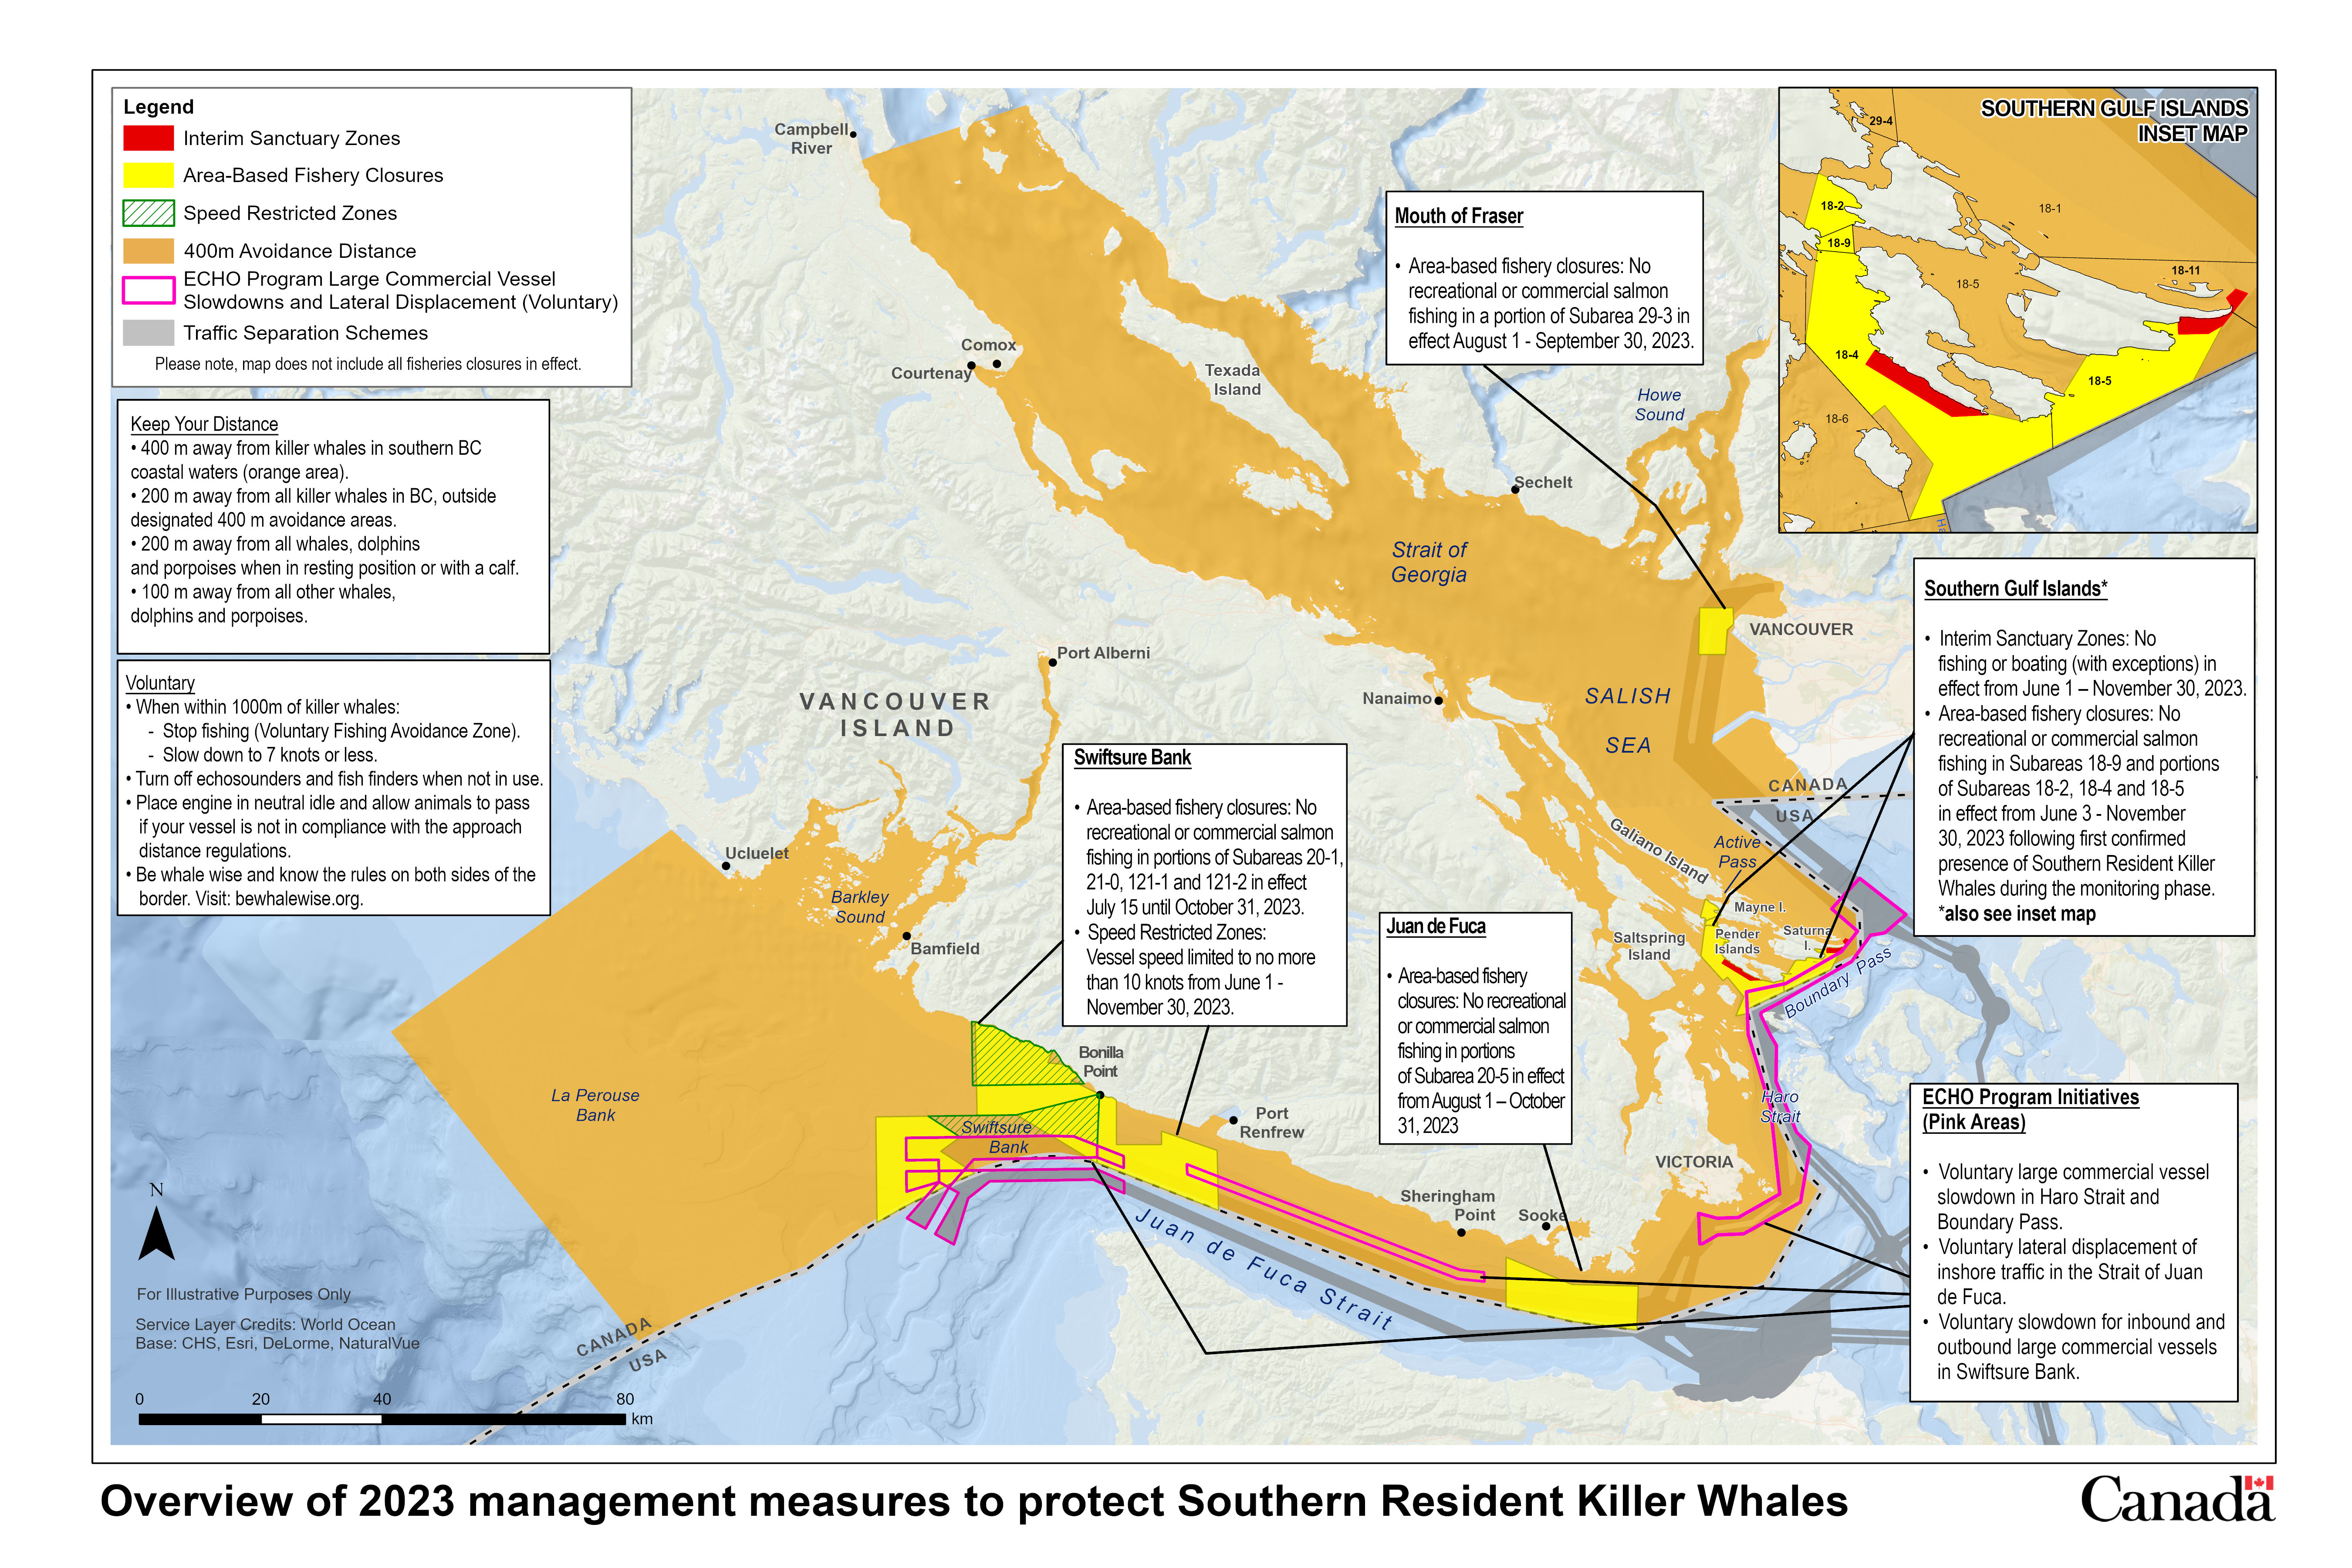 Overview of management measures to support Southern Resident killer whale recovery